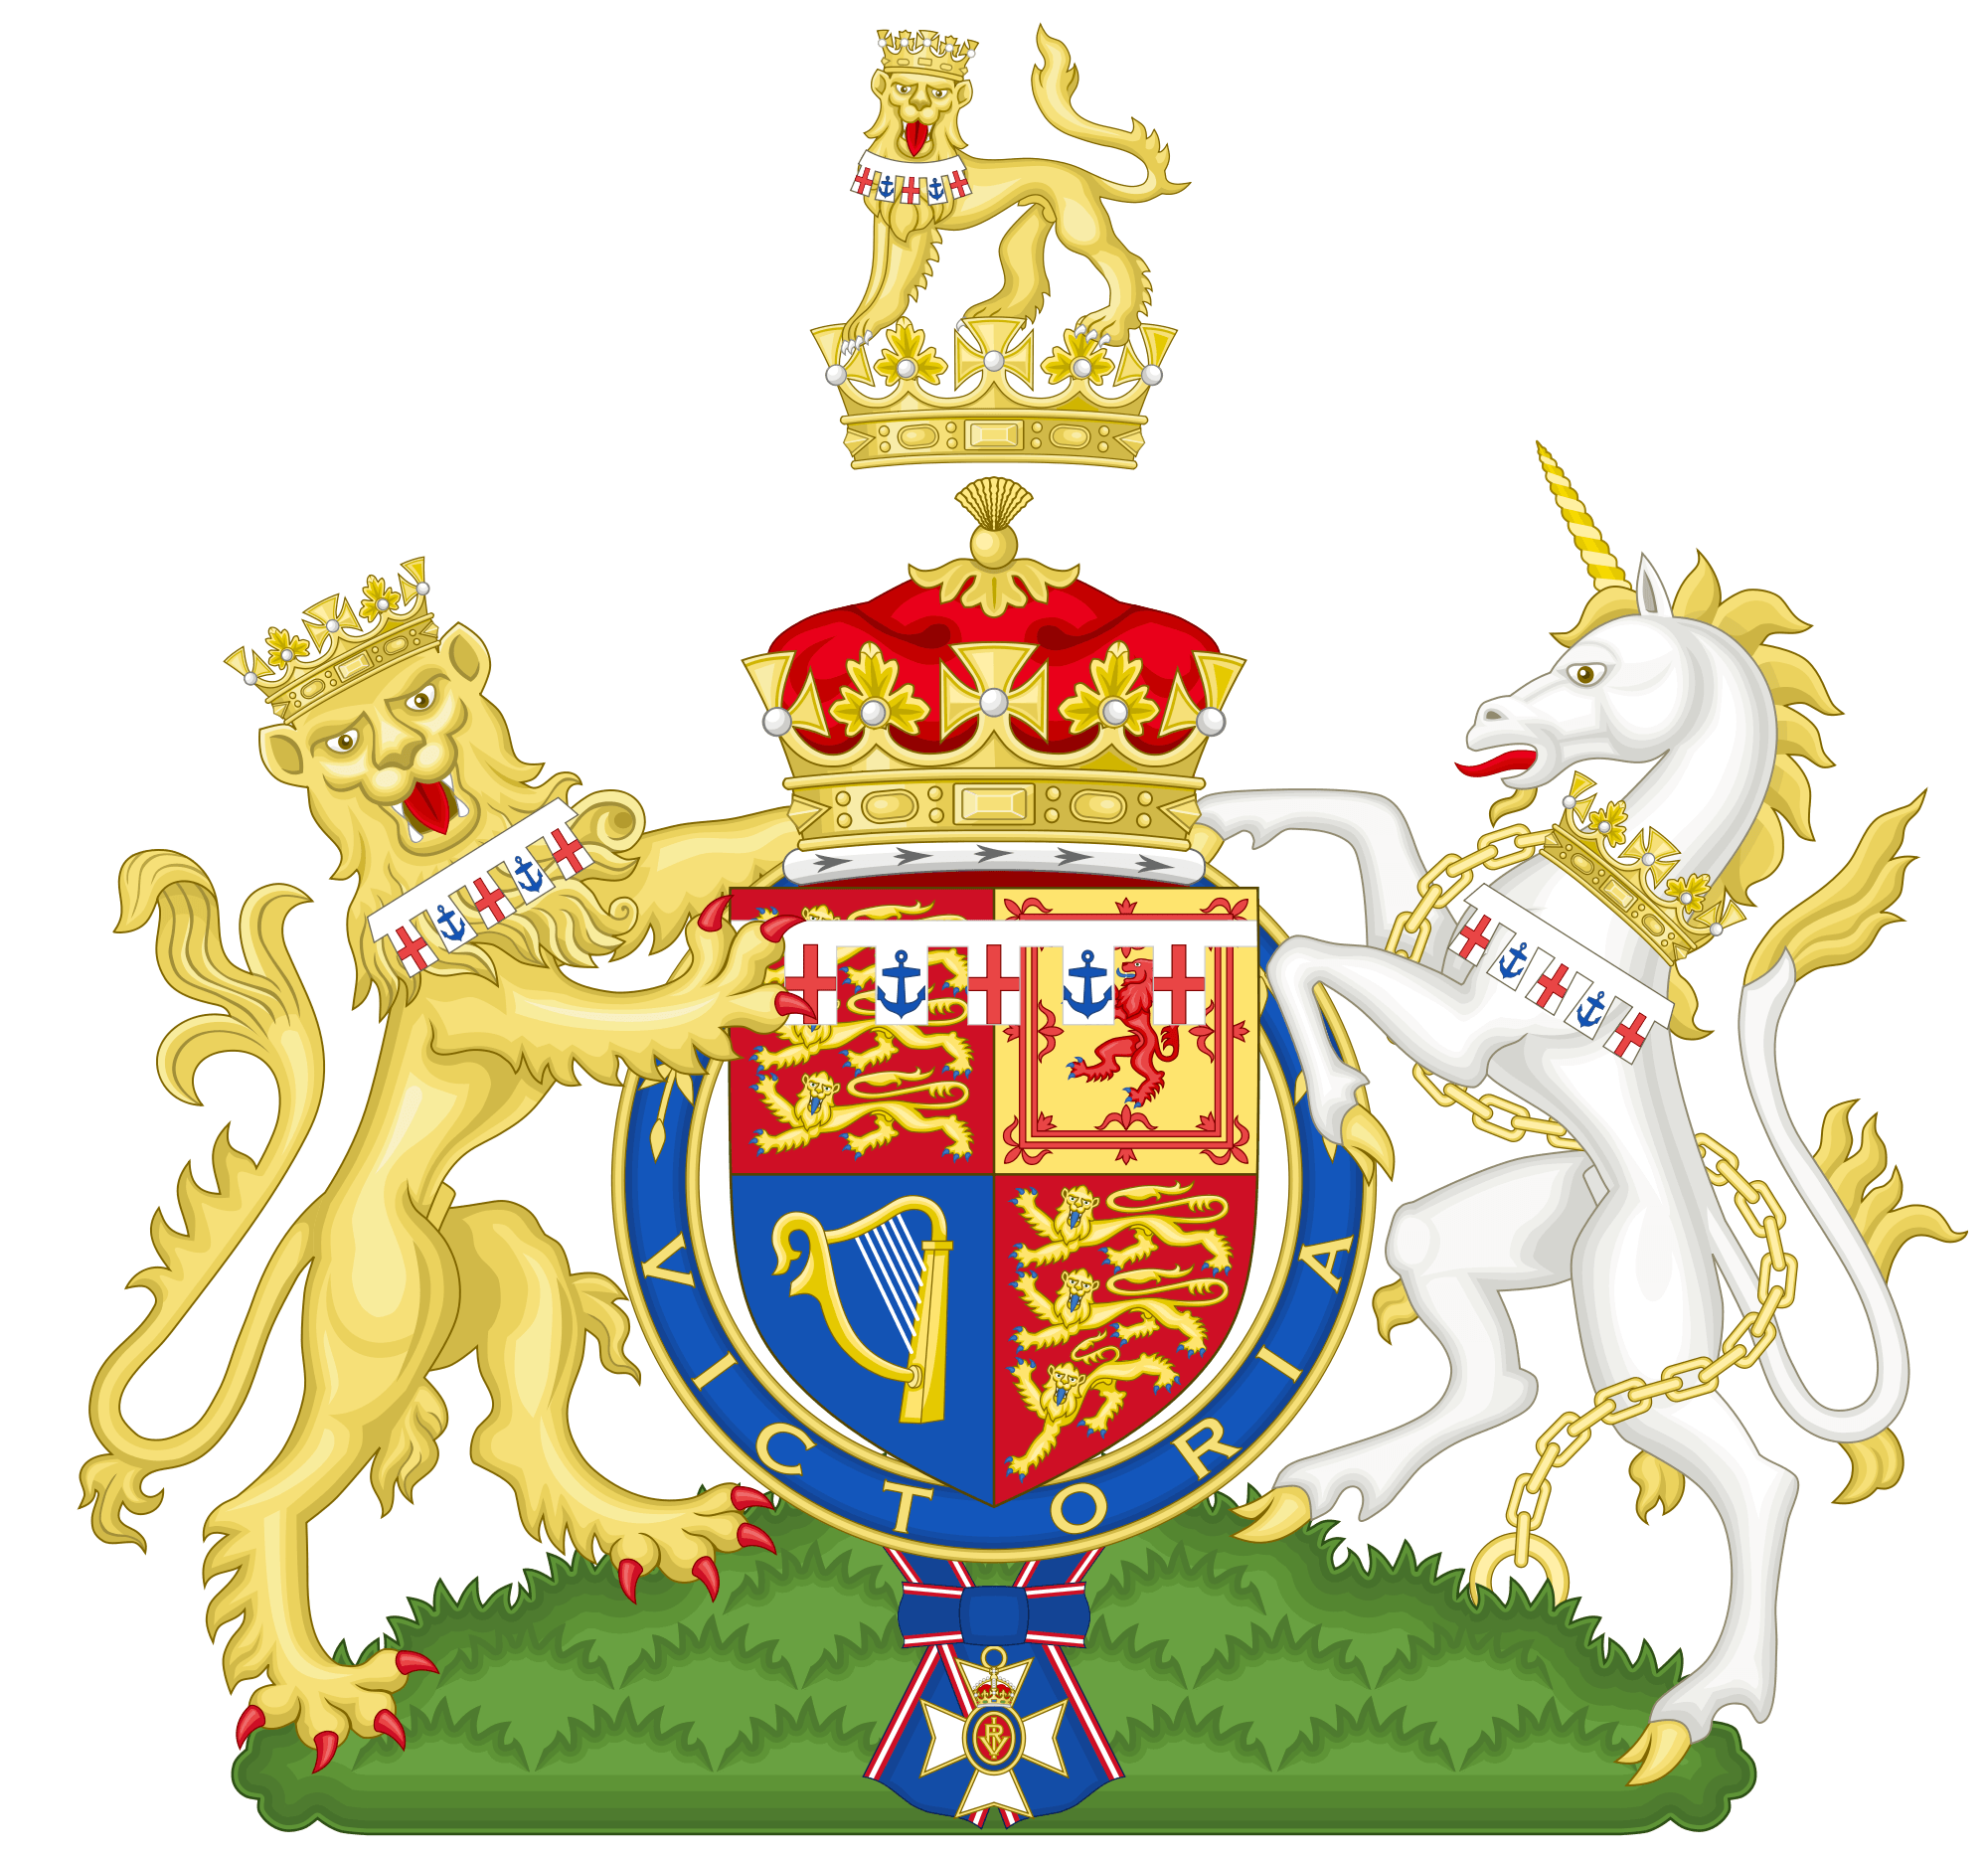 2 Lions and Crown Logo - Royal coat of arms of the United Kingdom